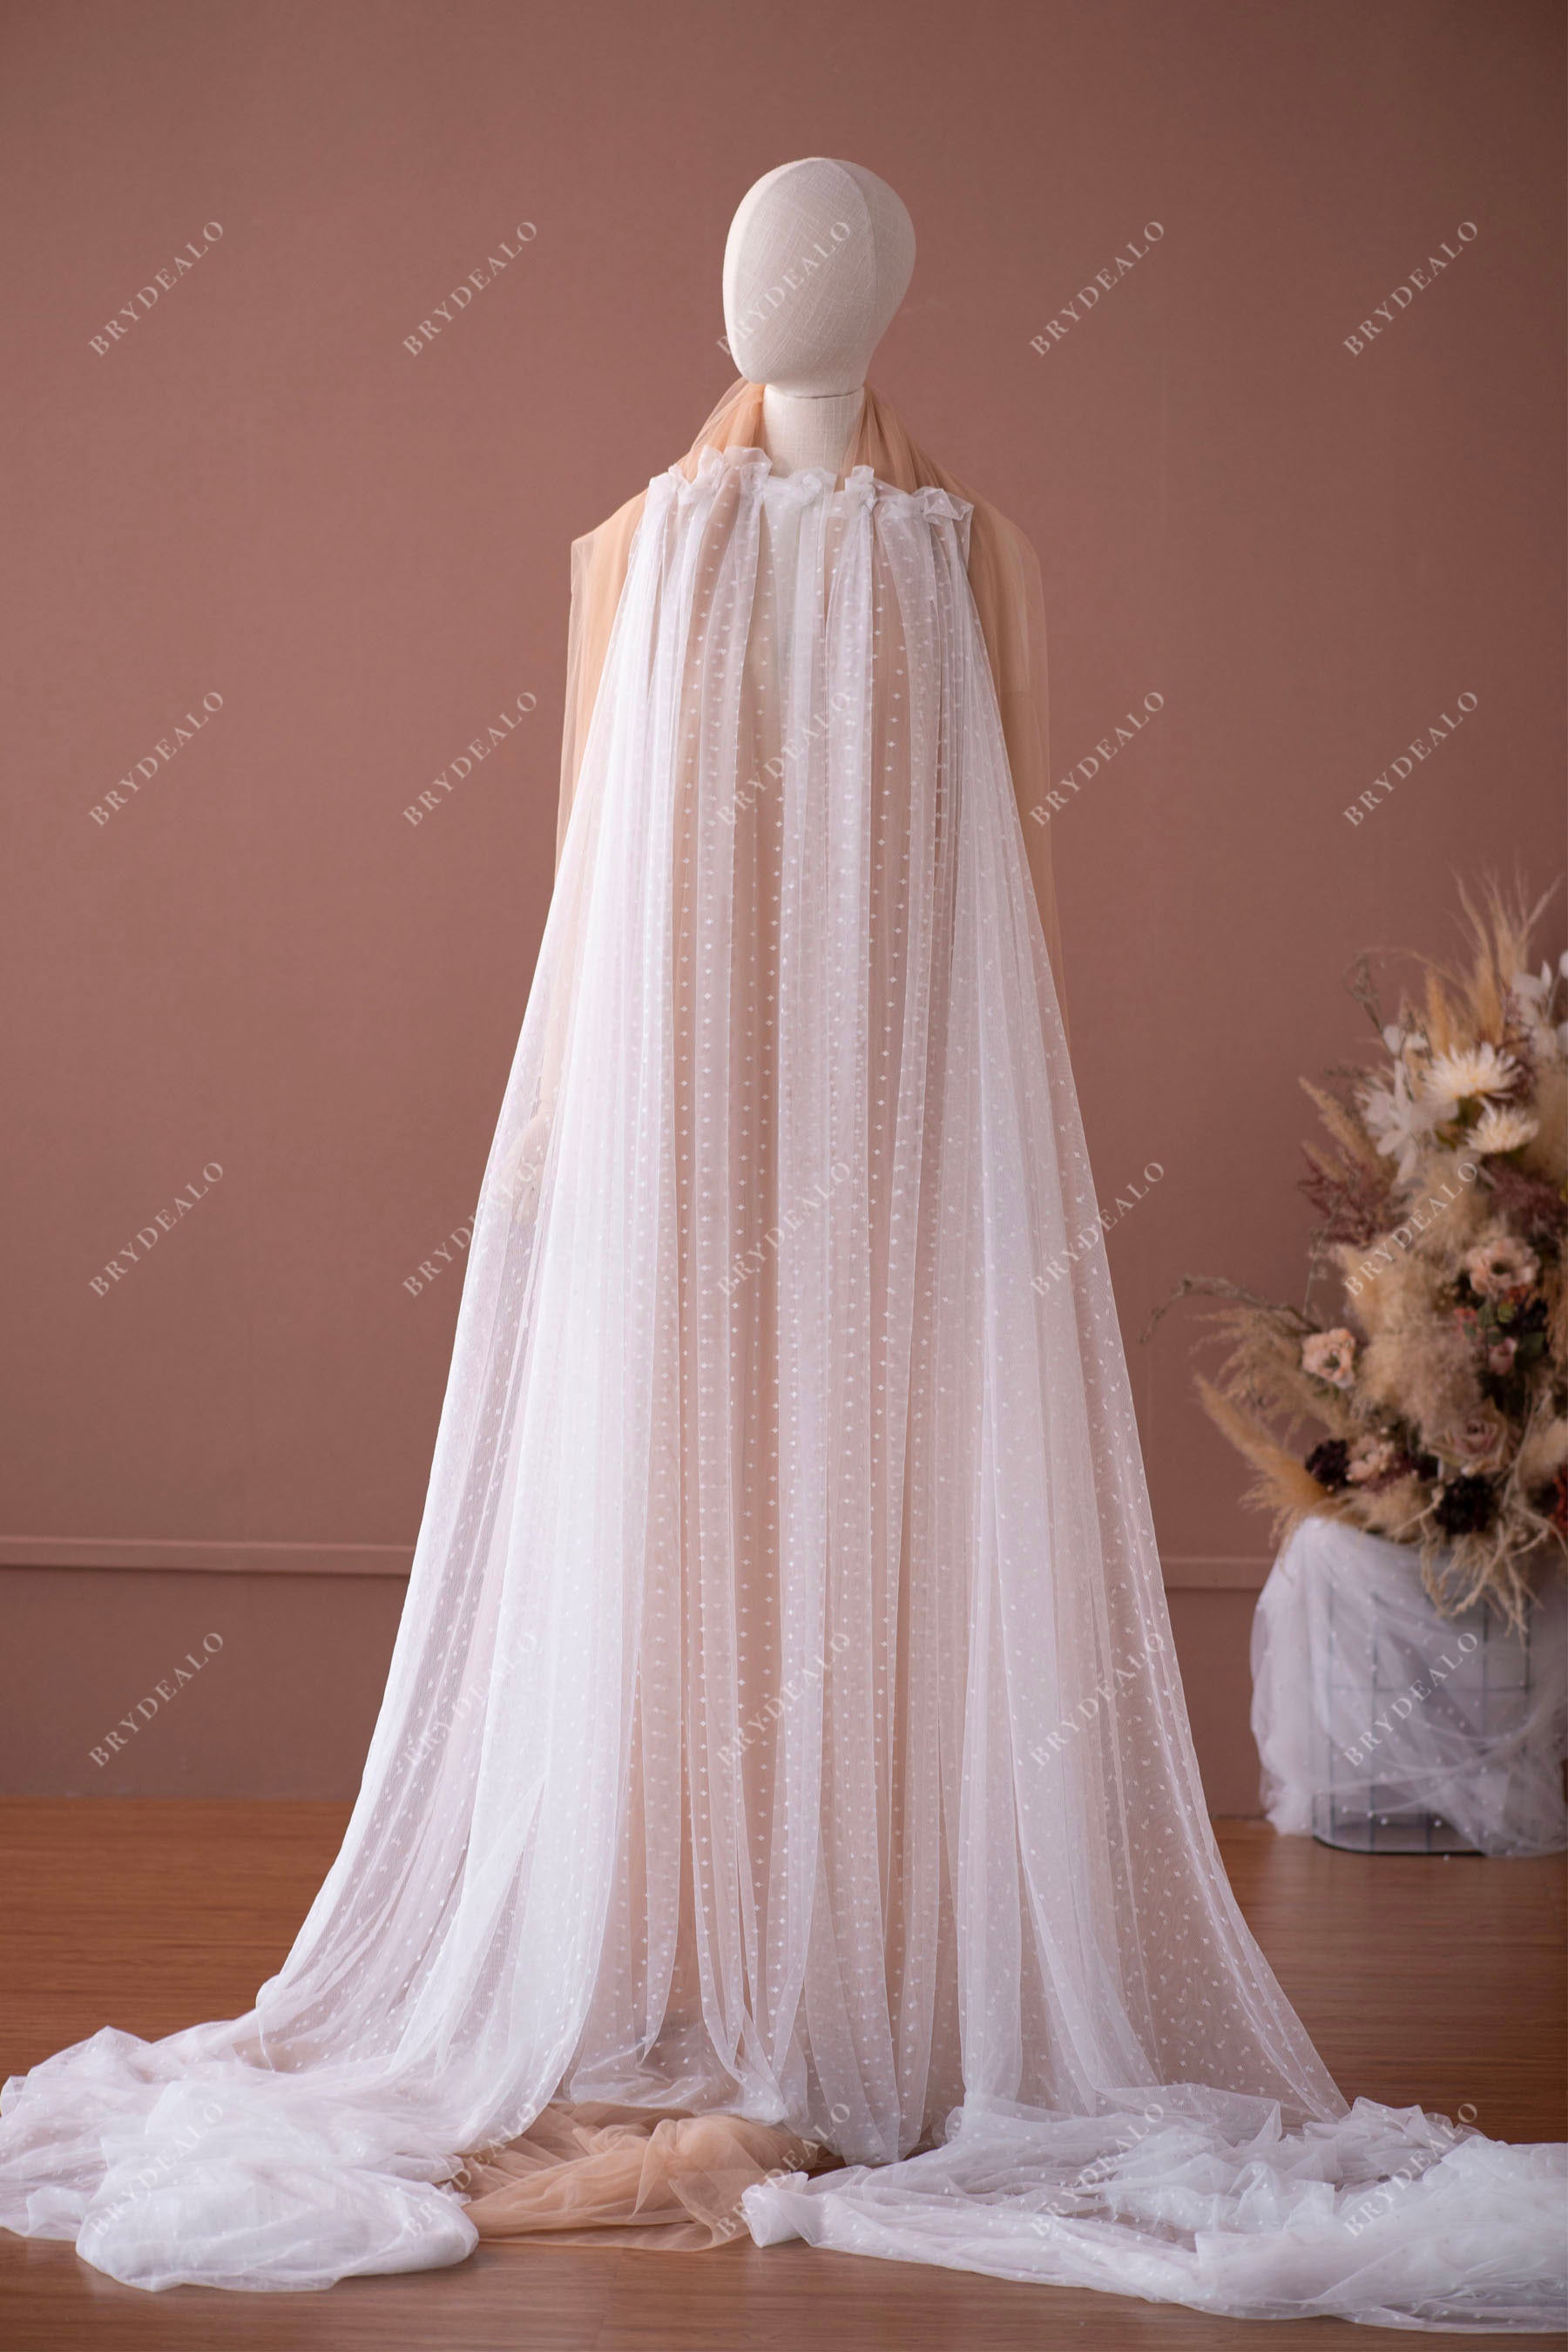 wholesale jersey dot lace tulle fabric for wedding dress